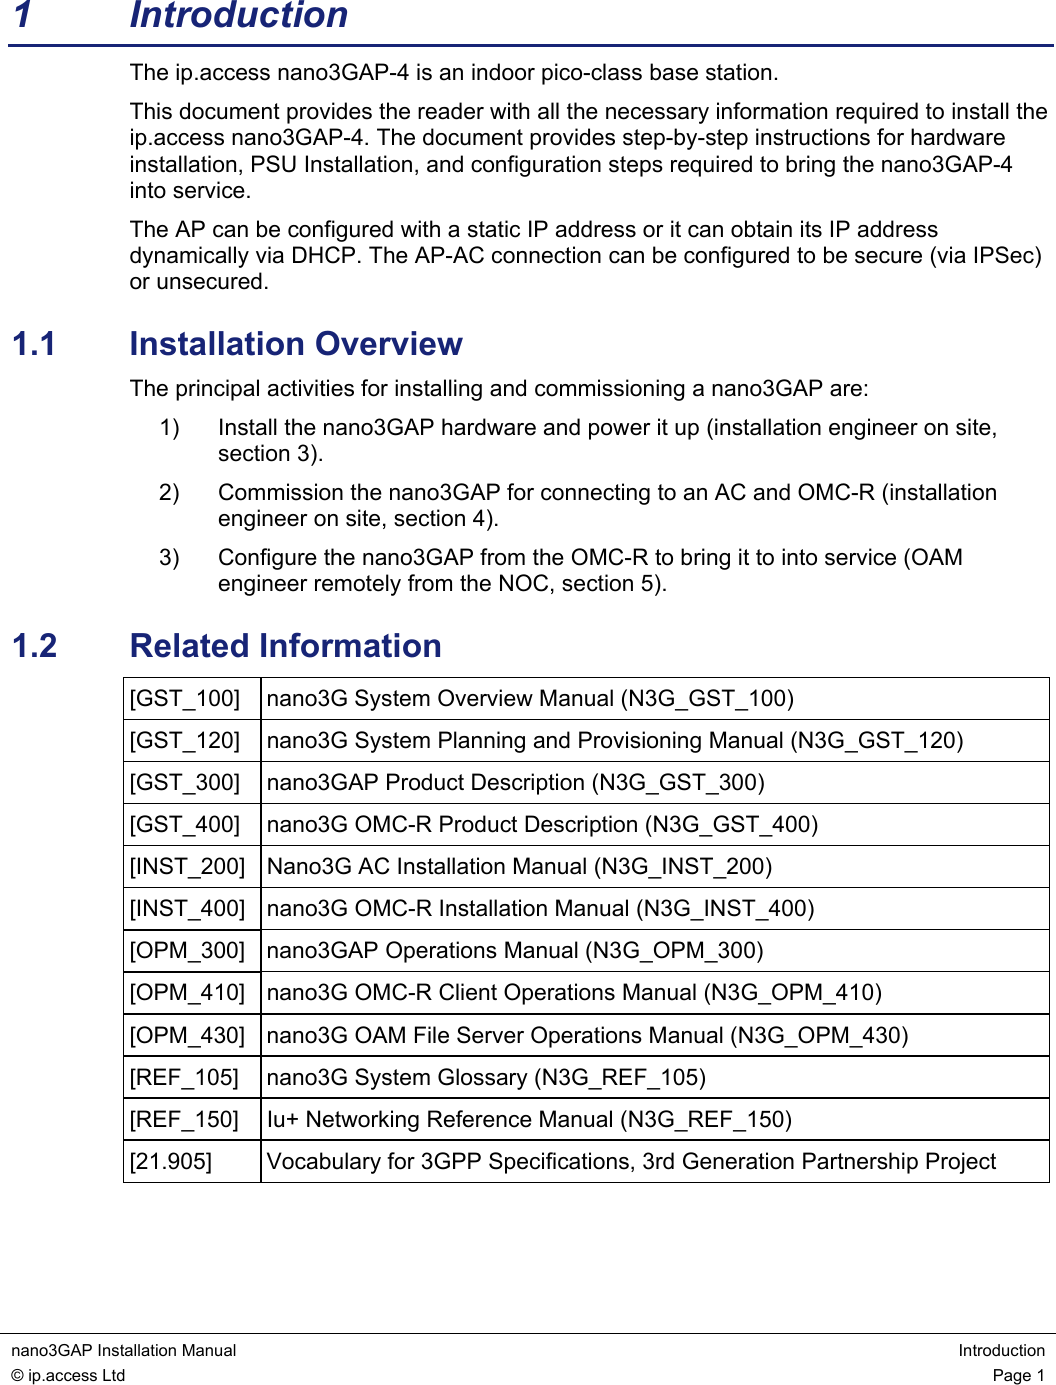  nano3GAP Installation Manual  Introduction © ip.access Ltd  Page 1  1 Introduction The ip.access nano3GAP-4 is an indoor pico-class base station. This document provides the reader with all the necessary information required to install the ip.access nano3GAP-4. The document provides step-by-step instructions for hardware installation, PSU Installation, and configuration steps required to bring the nano3GAP-4 into service. The AP can be configured with a static IP address or it can obtain its IP address dynamically via DHCP. The AP-AC connection can be configured to be secure (via IPSec) or unsecured. 1.1  Installation Overview The principal activities for installing and commissioning a nano3GAP are: 1)  Install the nano3GAP hardware and power it up (installation engineer on site, section 3). 2)  Commission the nano3GAP for connecting to an AC and OMC-R (installation engineer on site, section 4). 3)  Configure the nano3GAP from the OMC-R to bring it to into service (OAM engineer remotely from the NOC, section 5). 1.2  Related Information [GST_100]  nano3G System Overview Manual (N3G_GST_100) [GST_120]  nano3G System Planning and Provisioning Manual (N3G_GST_120) [GST_300]  nano3GAP Product Description (N3G_GST_300) [GST_400]  nano3G OMC-R Product Description (N3G_GST_400) [INST_200]  Nano3G AC Installation Manual (N3G_INST_200) [INST_400]  nano3G OMC-R Installation Manual (N3G_INST_400) [OPM_300] nano3GAP Operations Manual (N3G_OPM_300) [OPM_410]  nano3G OMC-R Client Operations Manual (N3G_OPM_410) [OPM_430]  nano3G OAM File Server Operations Manual (N3G_OPM_430) [REF_105]  nano3G System Glossary (N3G_REF_105) [REF_150]  Iu+ Networking Reference Manual (N3G_REF_150) [21.905]  Vocabulary for 3GPP Specifications, 3rd Generation Partnership Project  